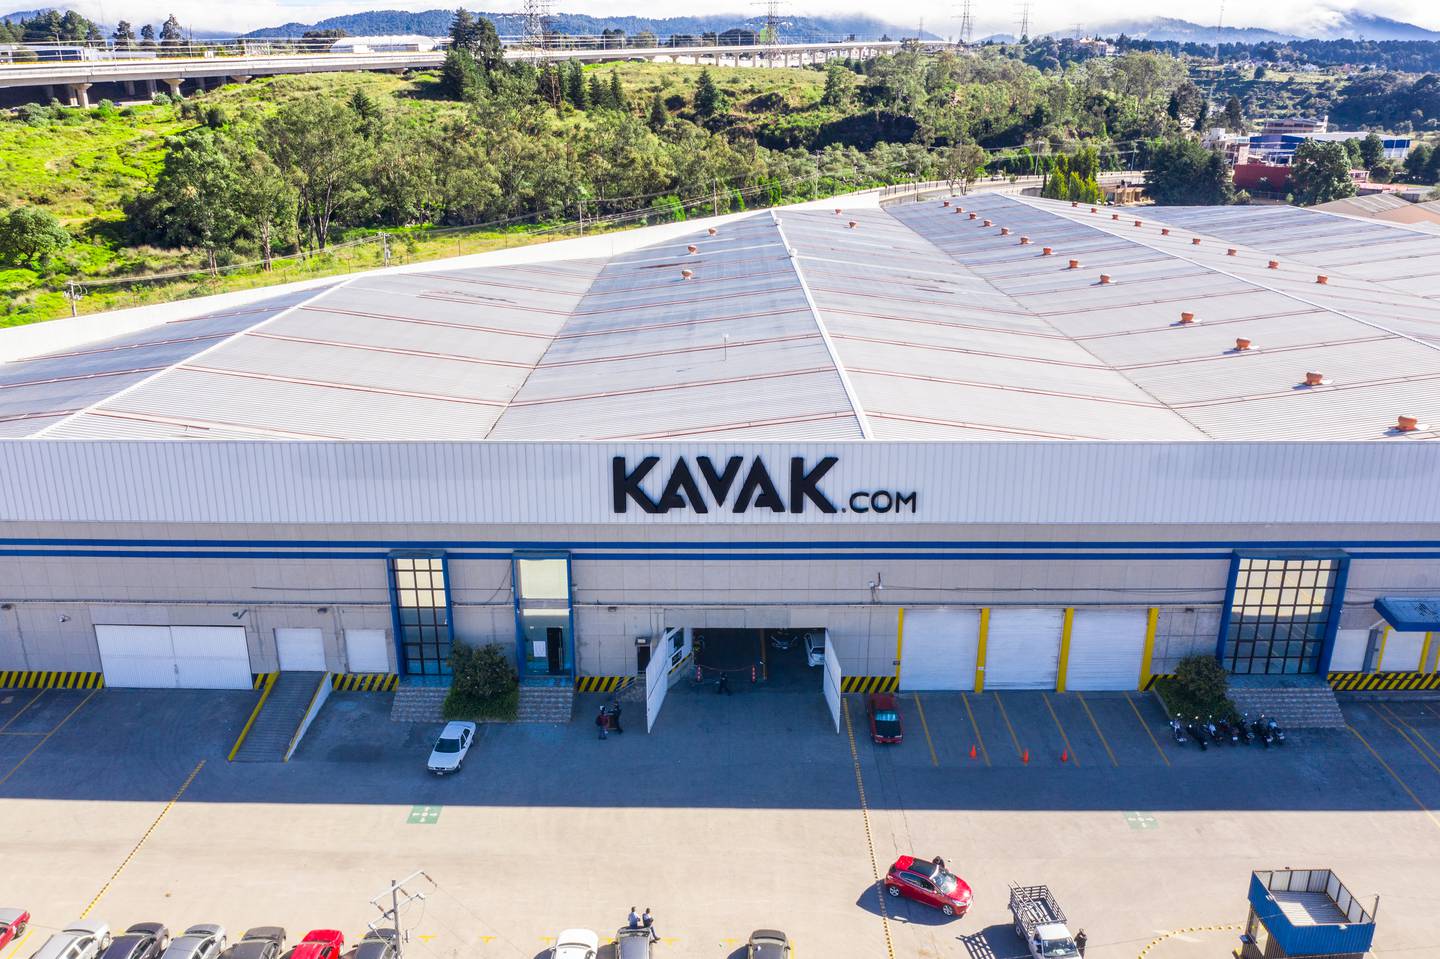 Kavak's facilities in Lerma, Mexico state.